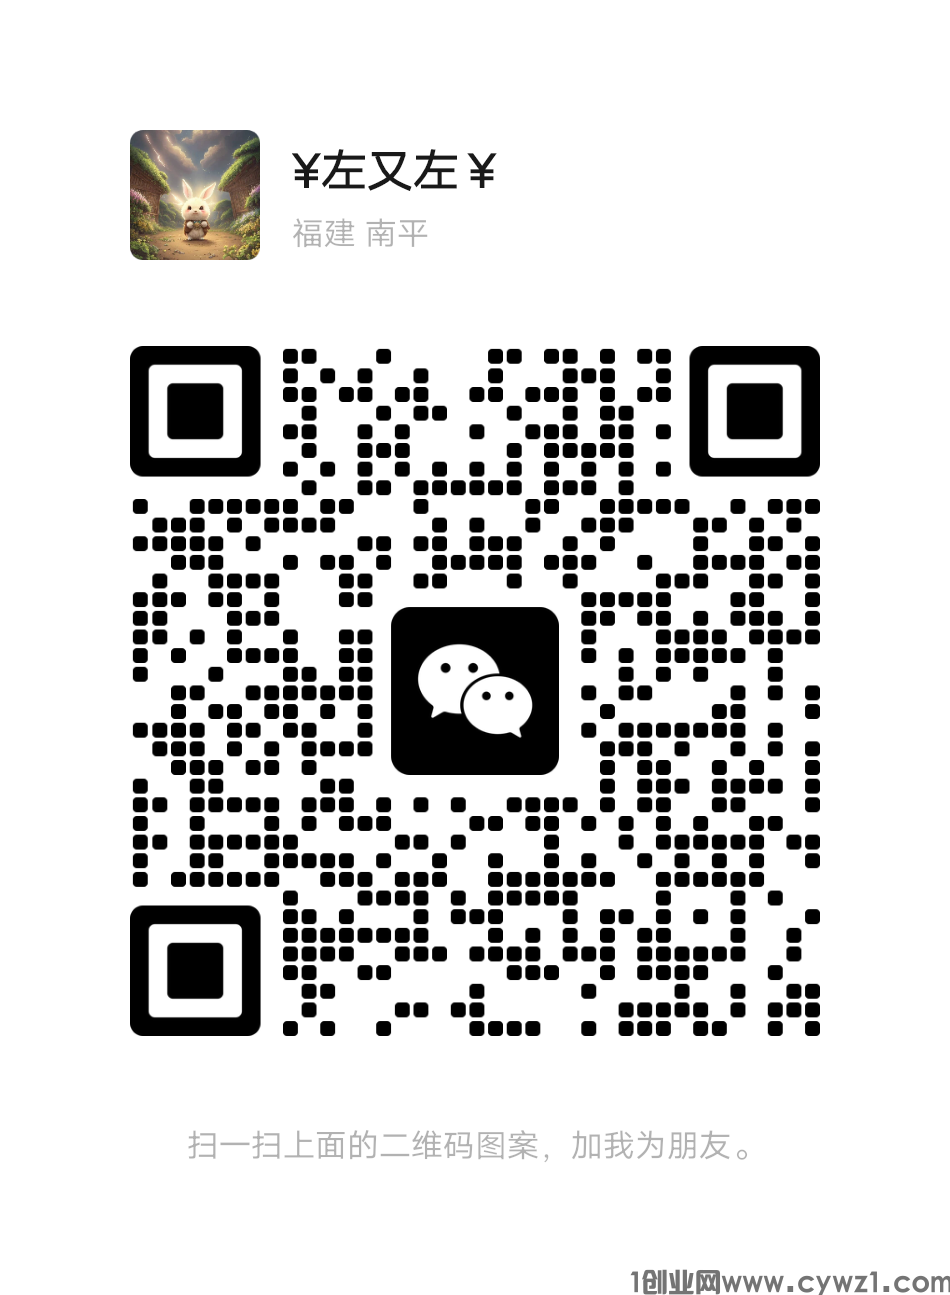 mmqrcode1691870107132.png